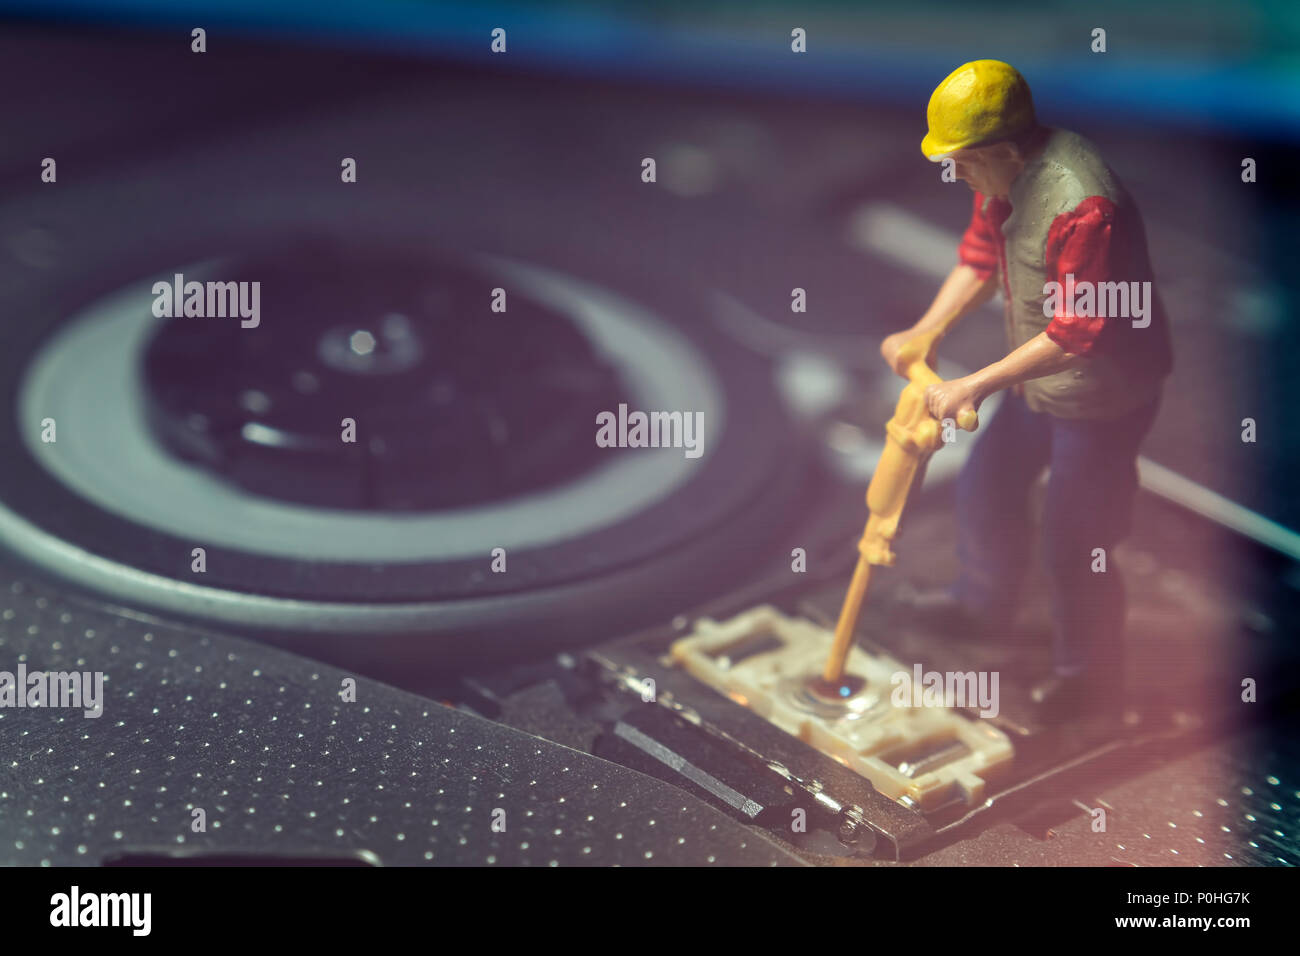 Miniature Worker Fixing The DVD Lens Stock Photo